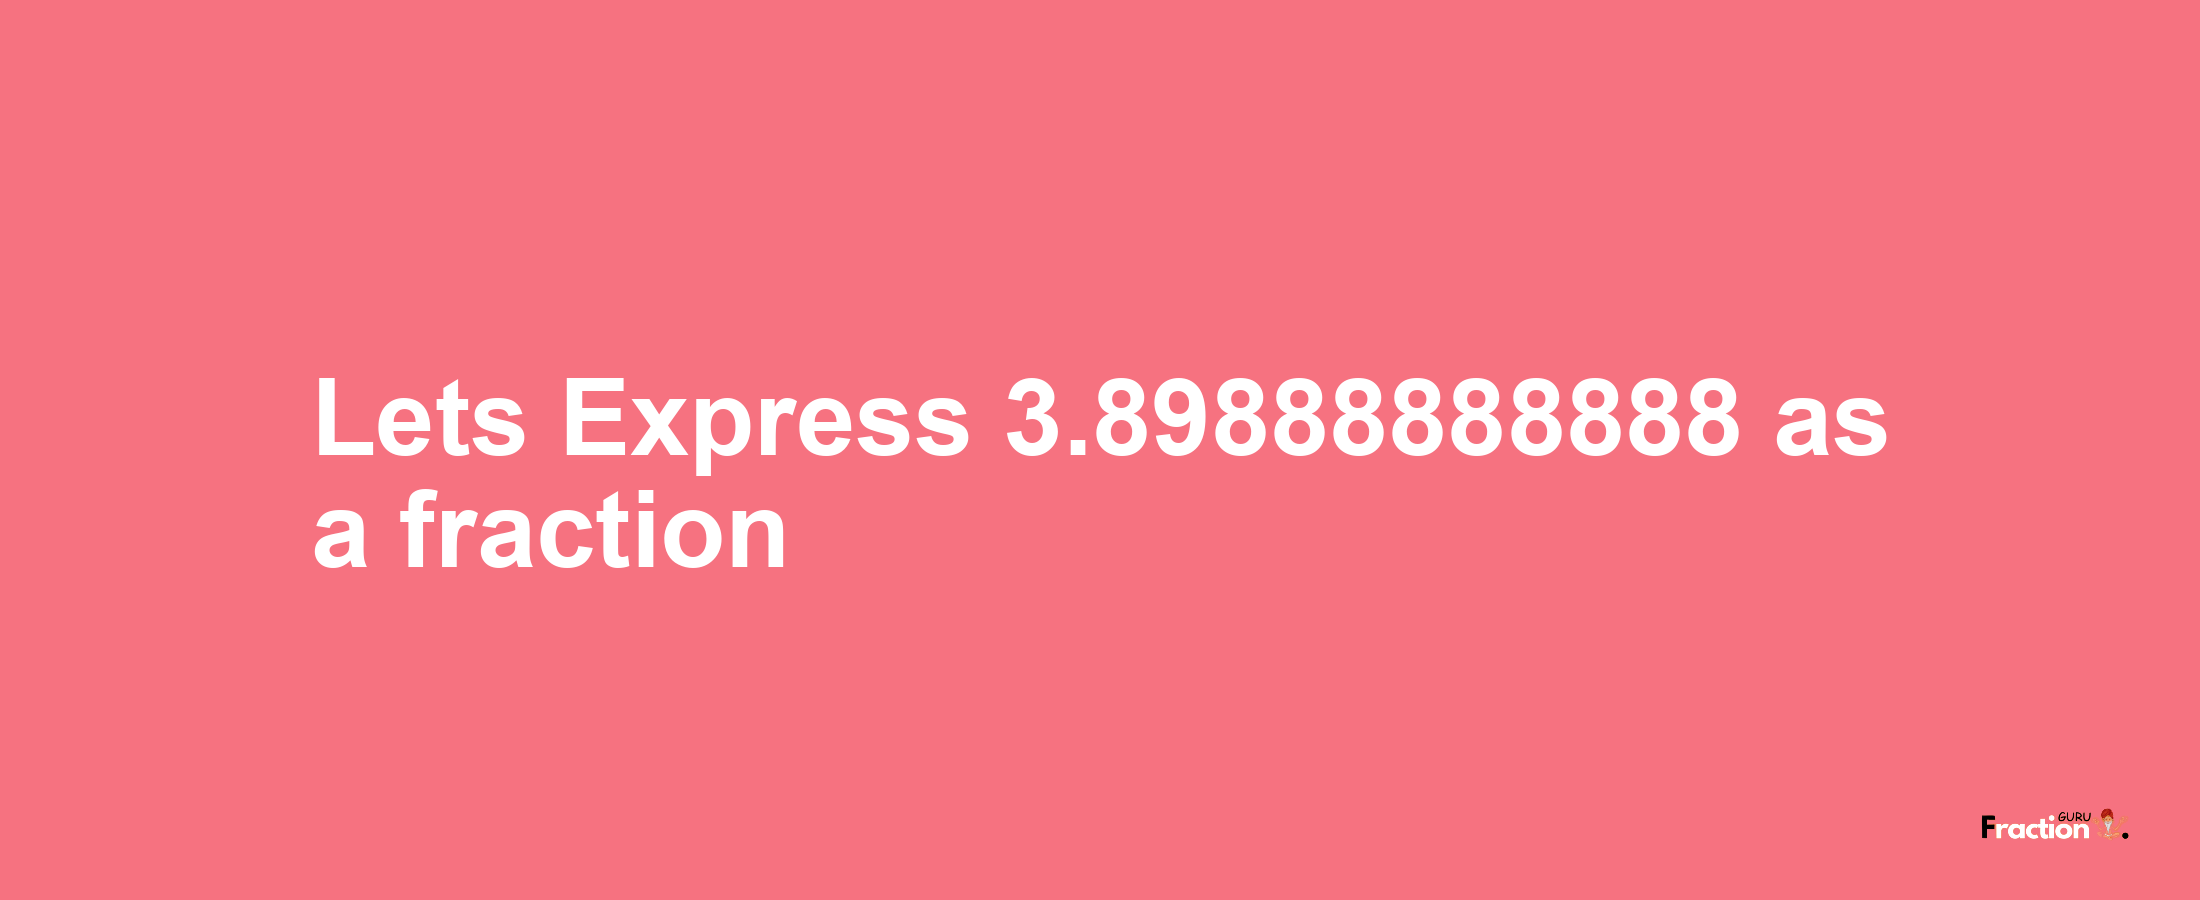 Lets Express 3.89888888888 as afraction